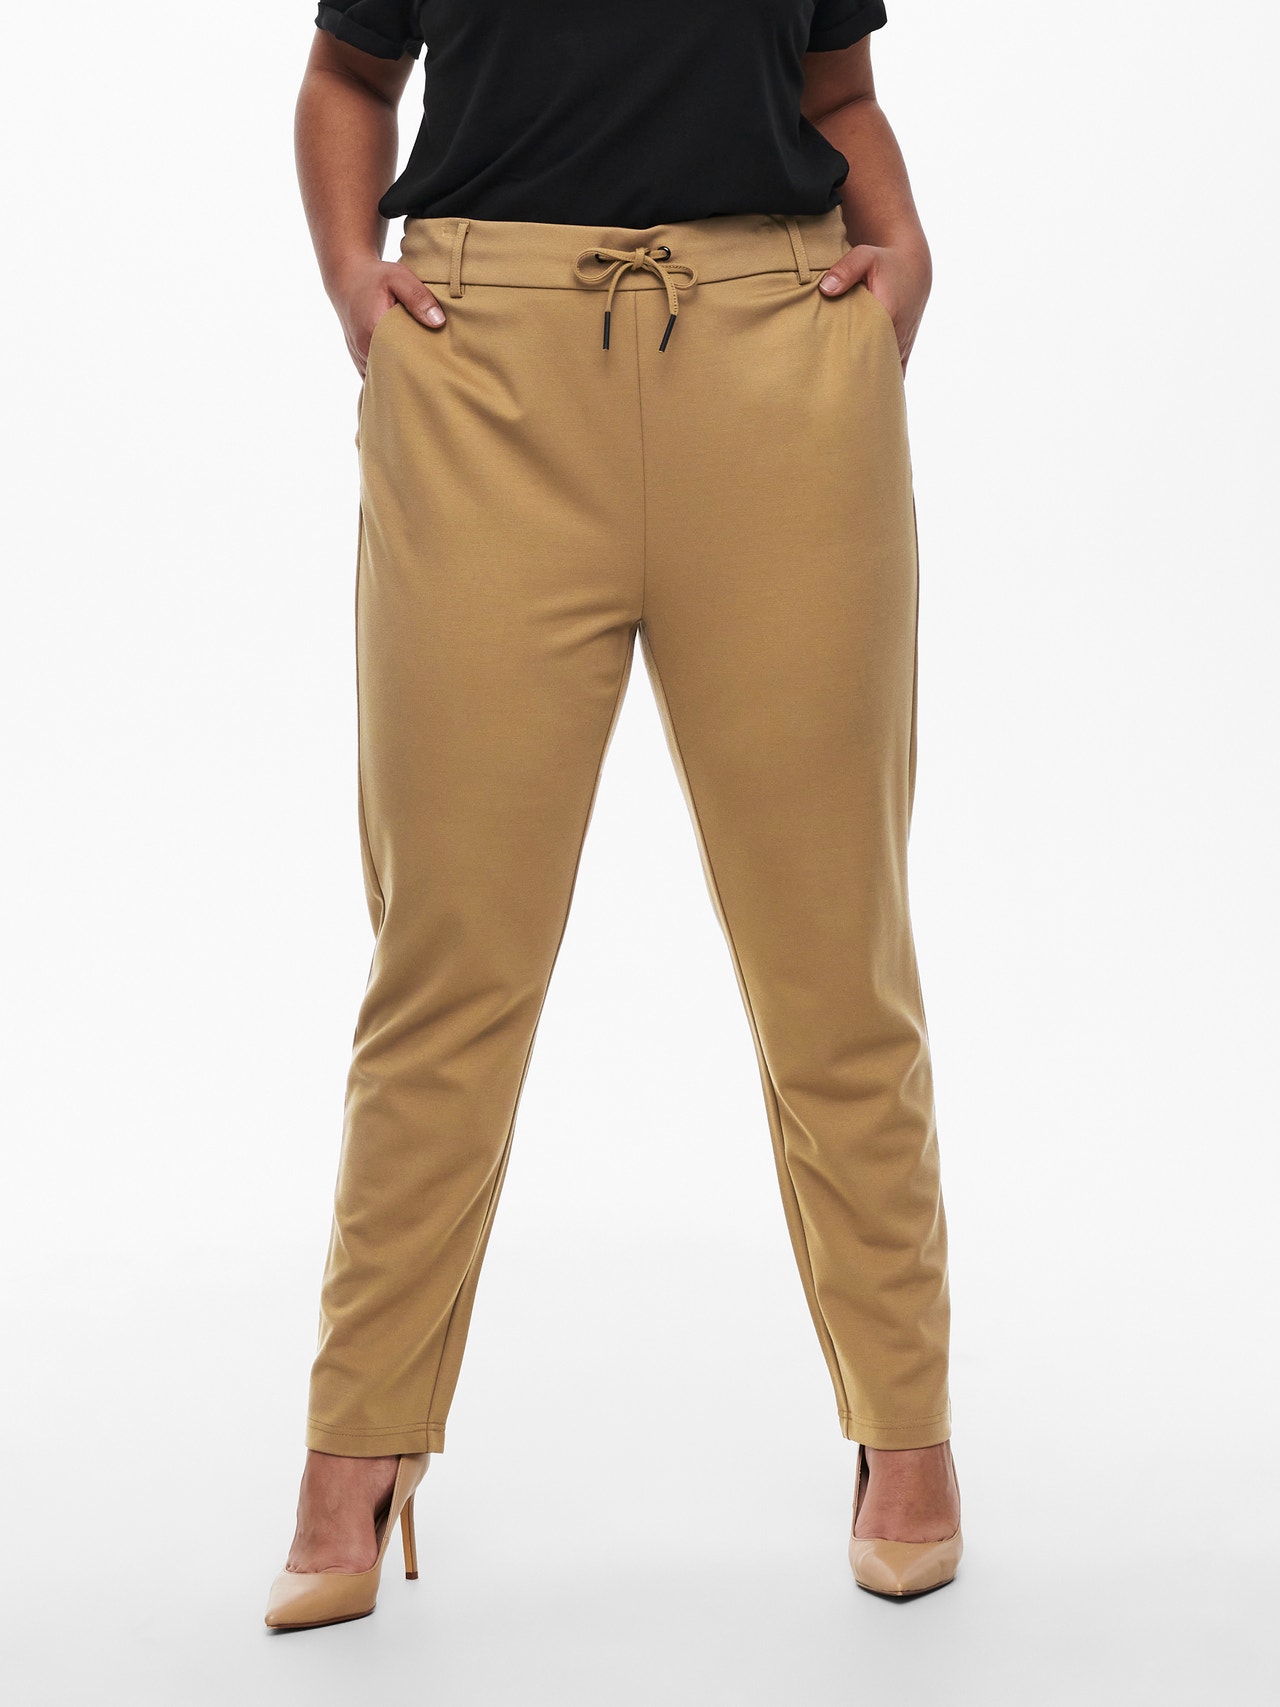 ONLY Curvy solid Trousers -Toasted Coconut - 15167323